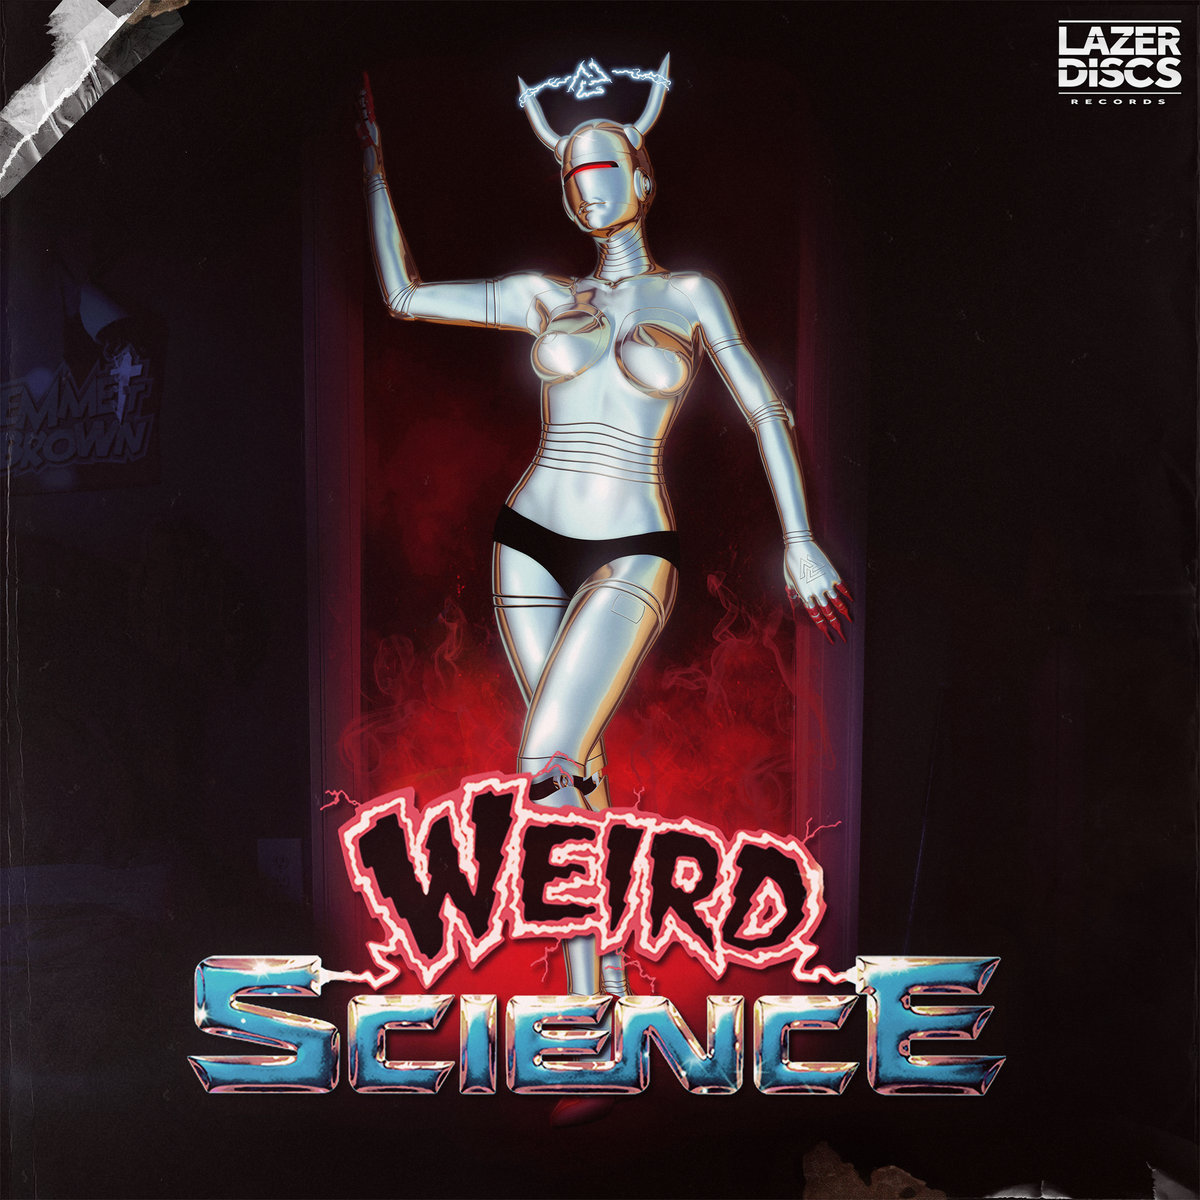 Weird Science Image